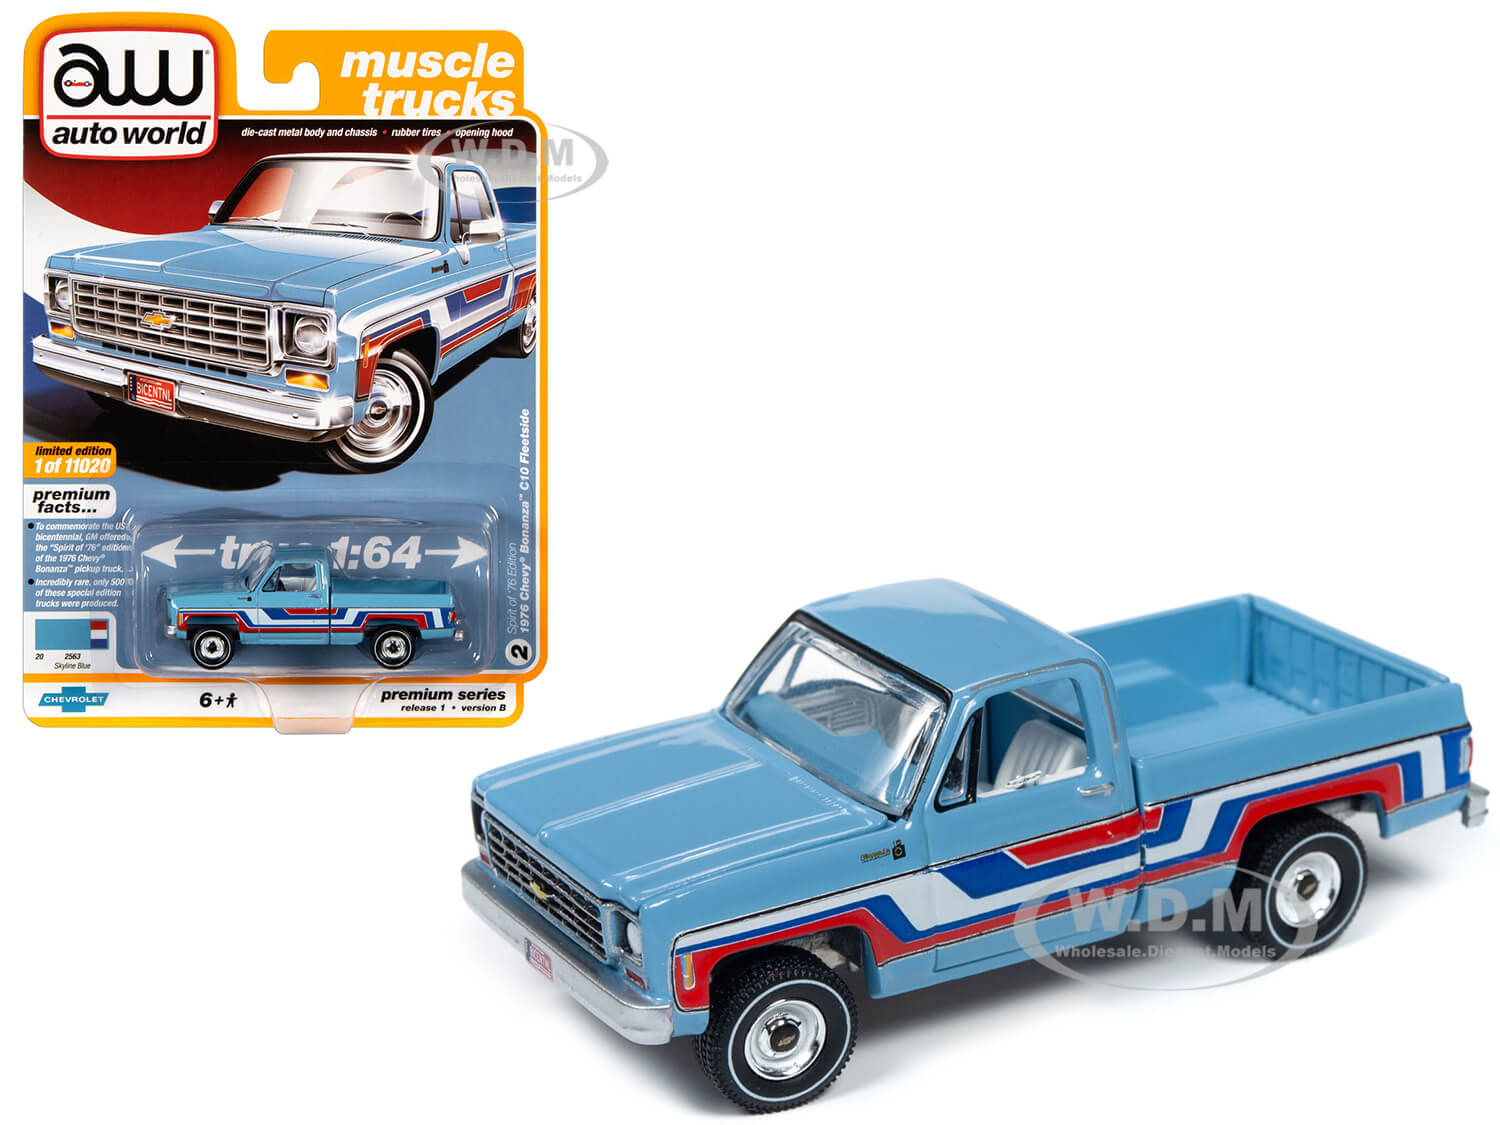 1976 Chevrolet Bonanza C10 Fleetside Pickup Truck "Bicentennial Edition" Skyline Blue with Stripes "Muscle Trucks" Limited Edition to 11020 pieces Wo